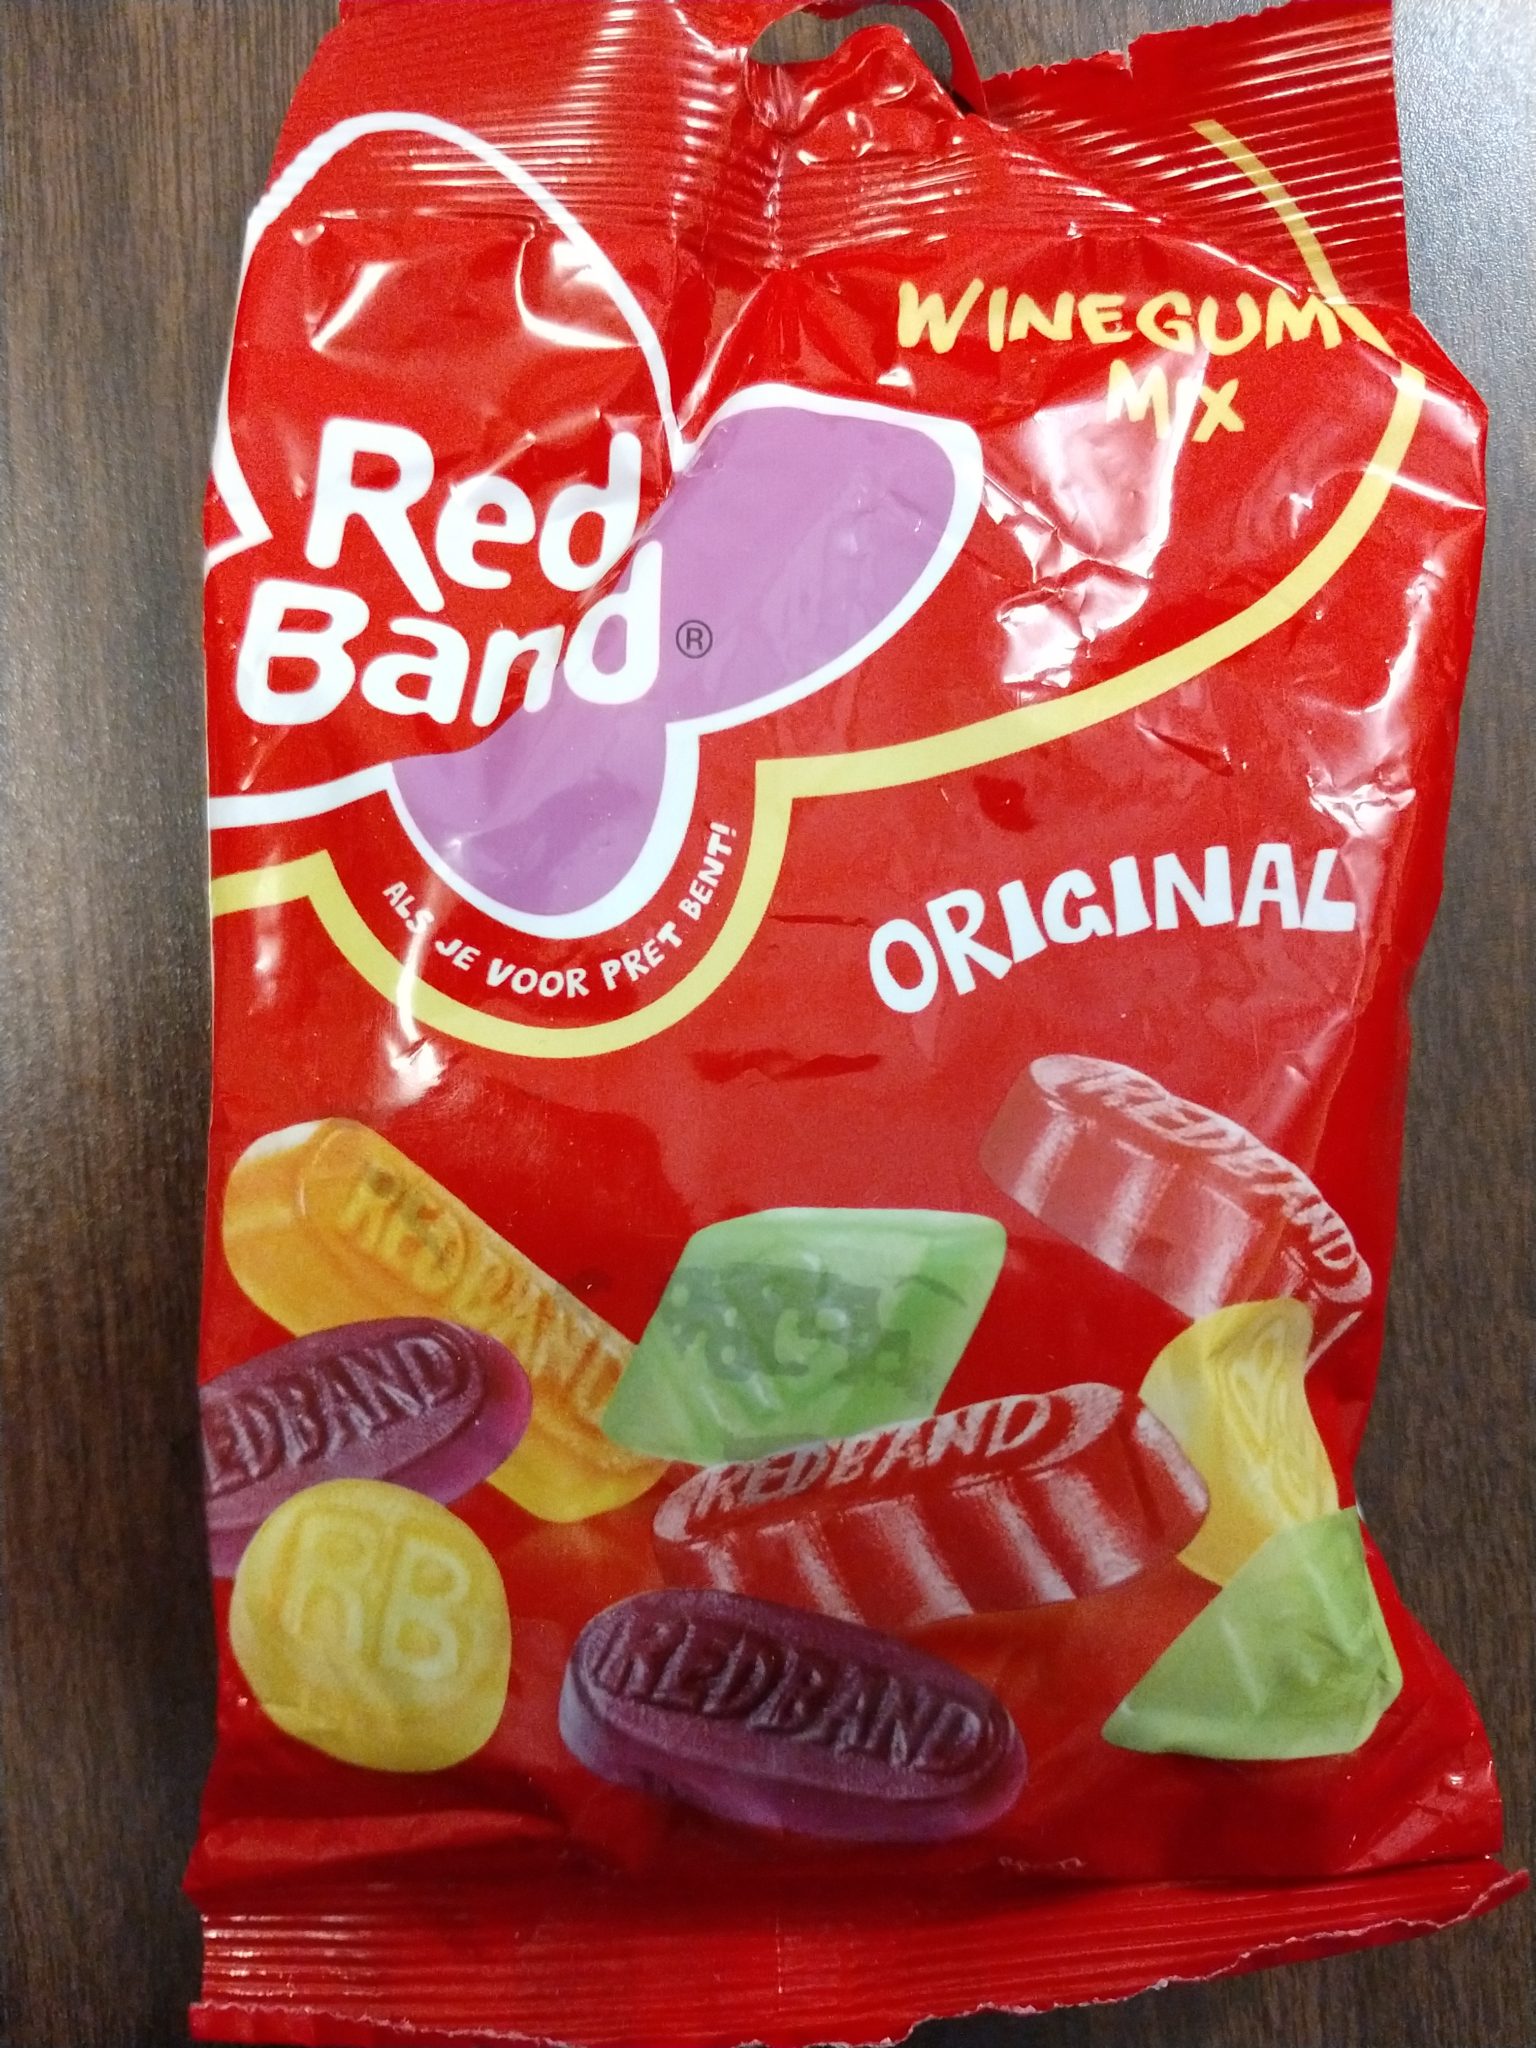 Red Band – Wine Gums